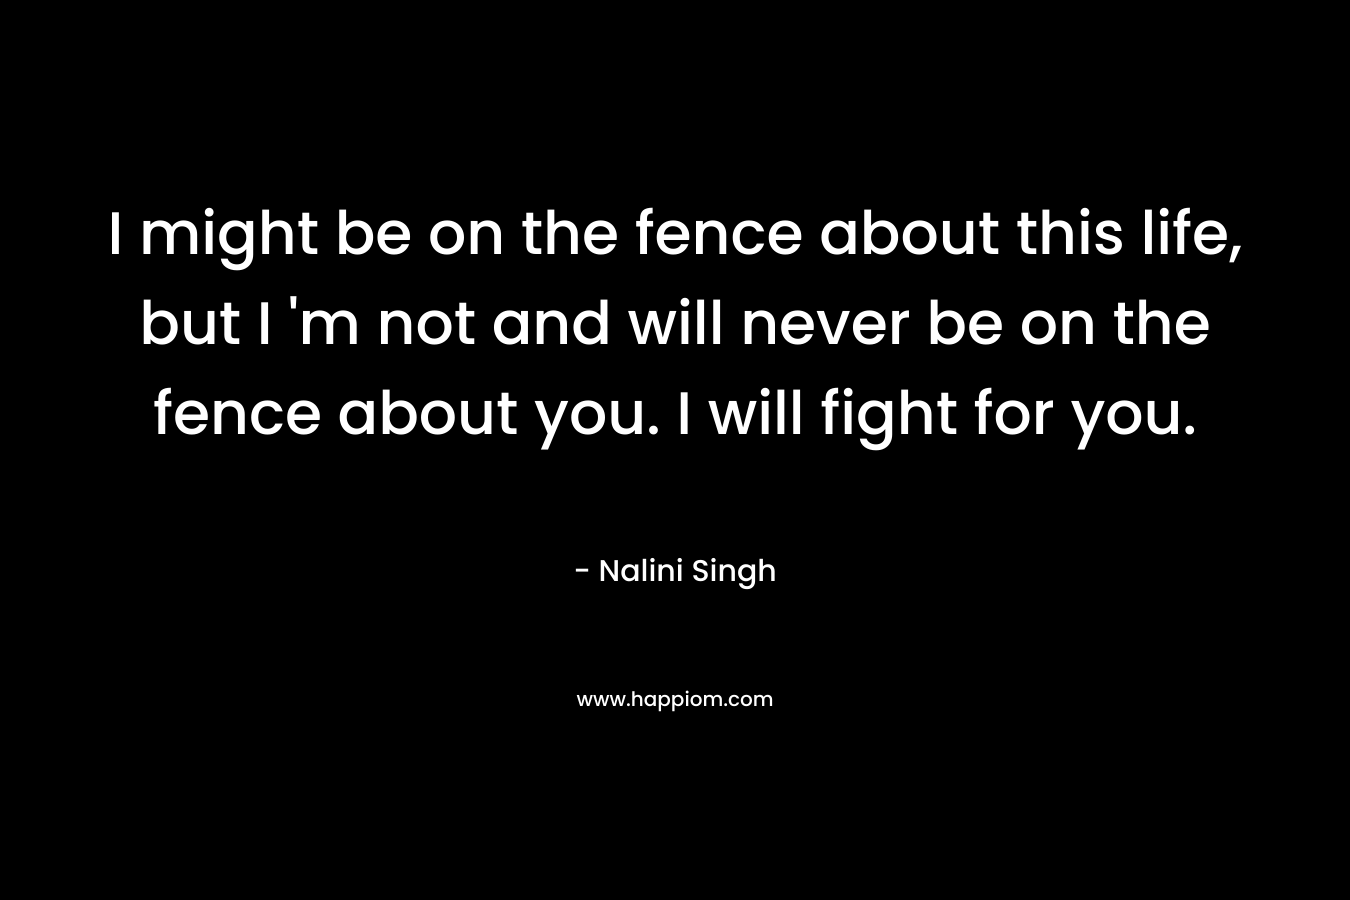 I might be on the fence about this life, but I 'm not and will never be on the fence about you. I will fight for you.